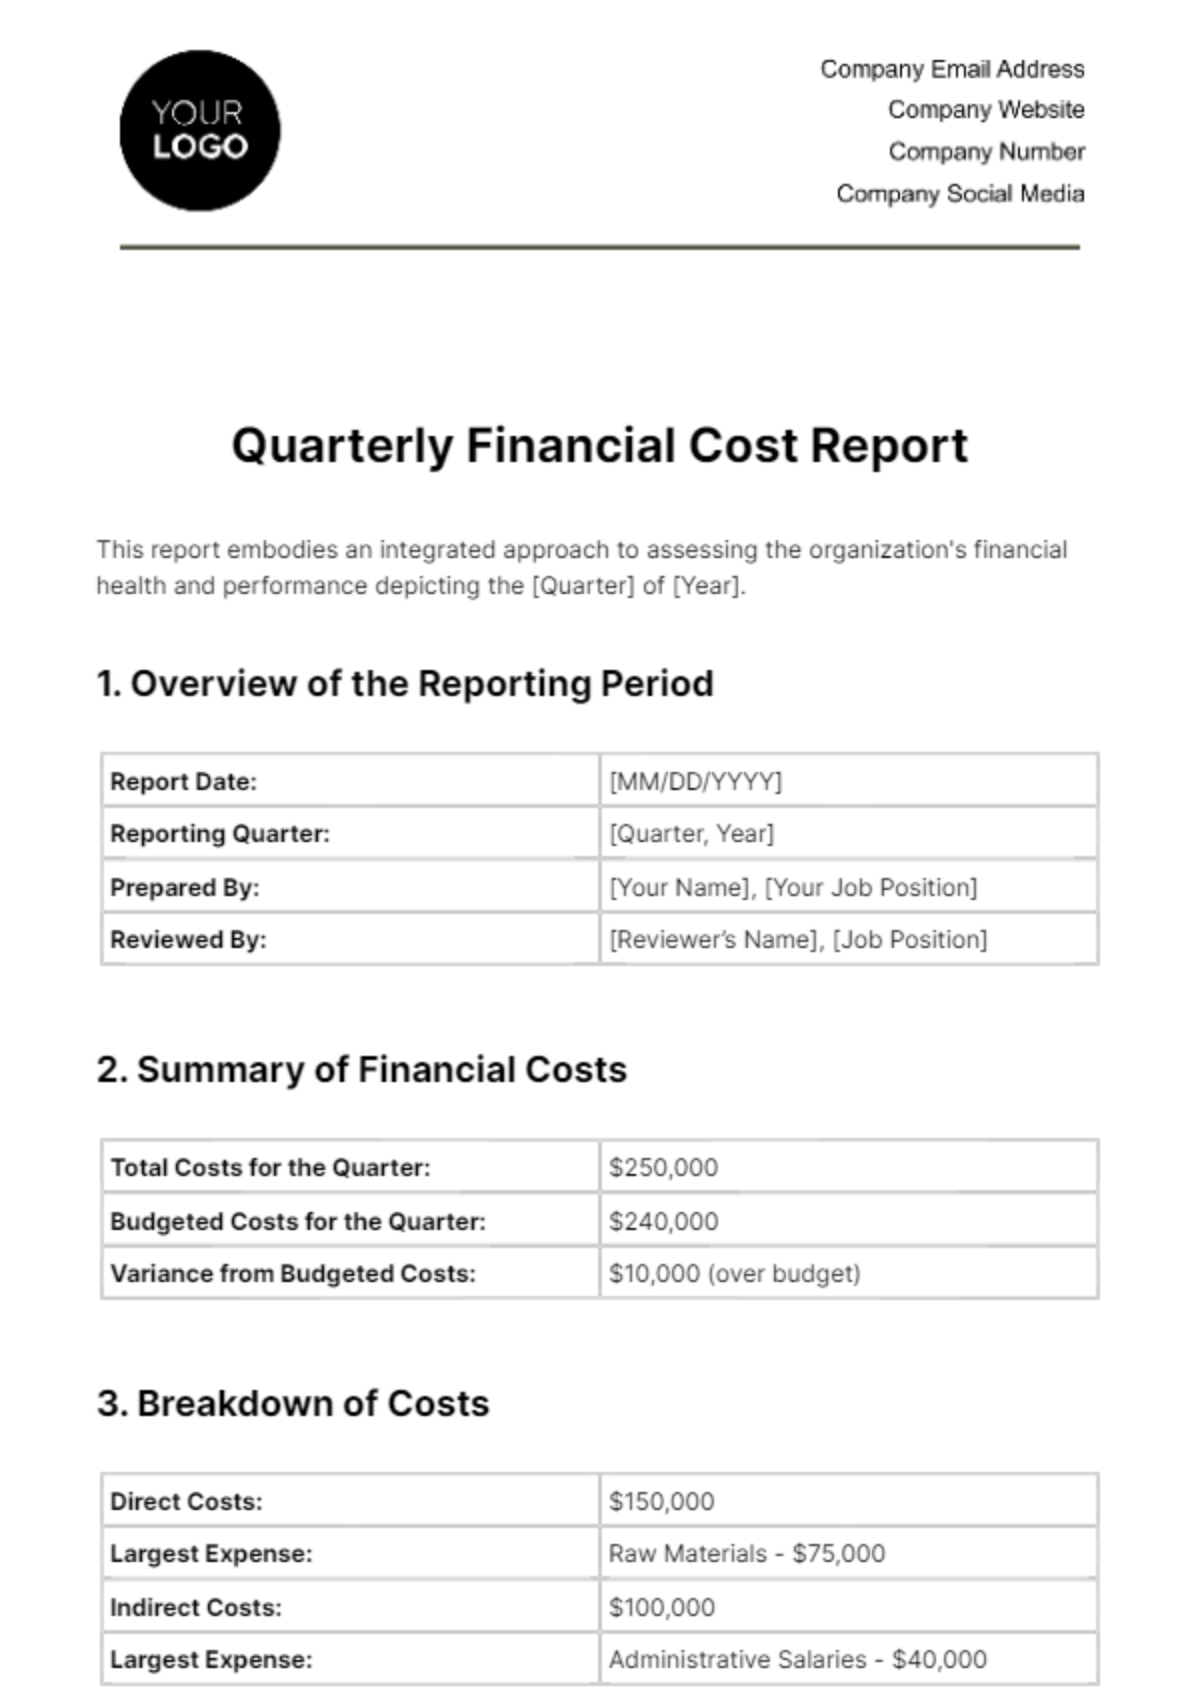 Quarterly Financial Cost Report Template